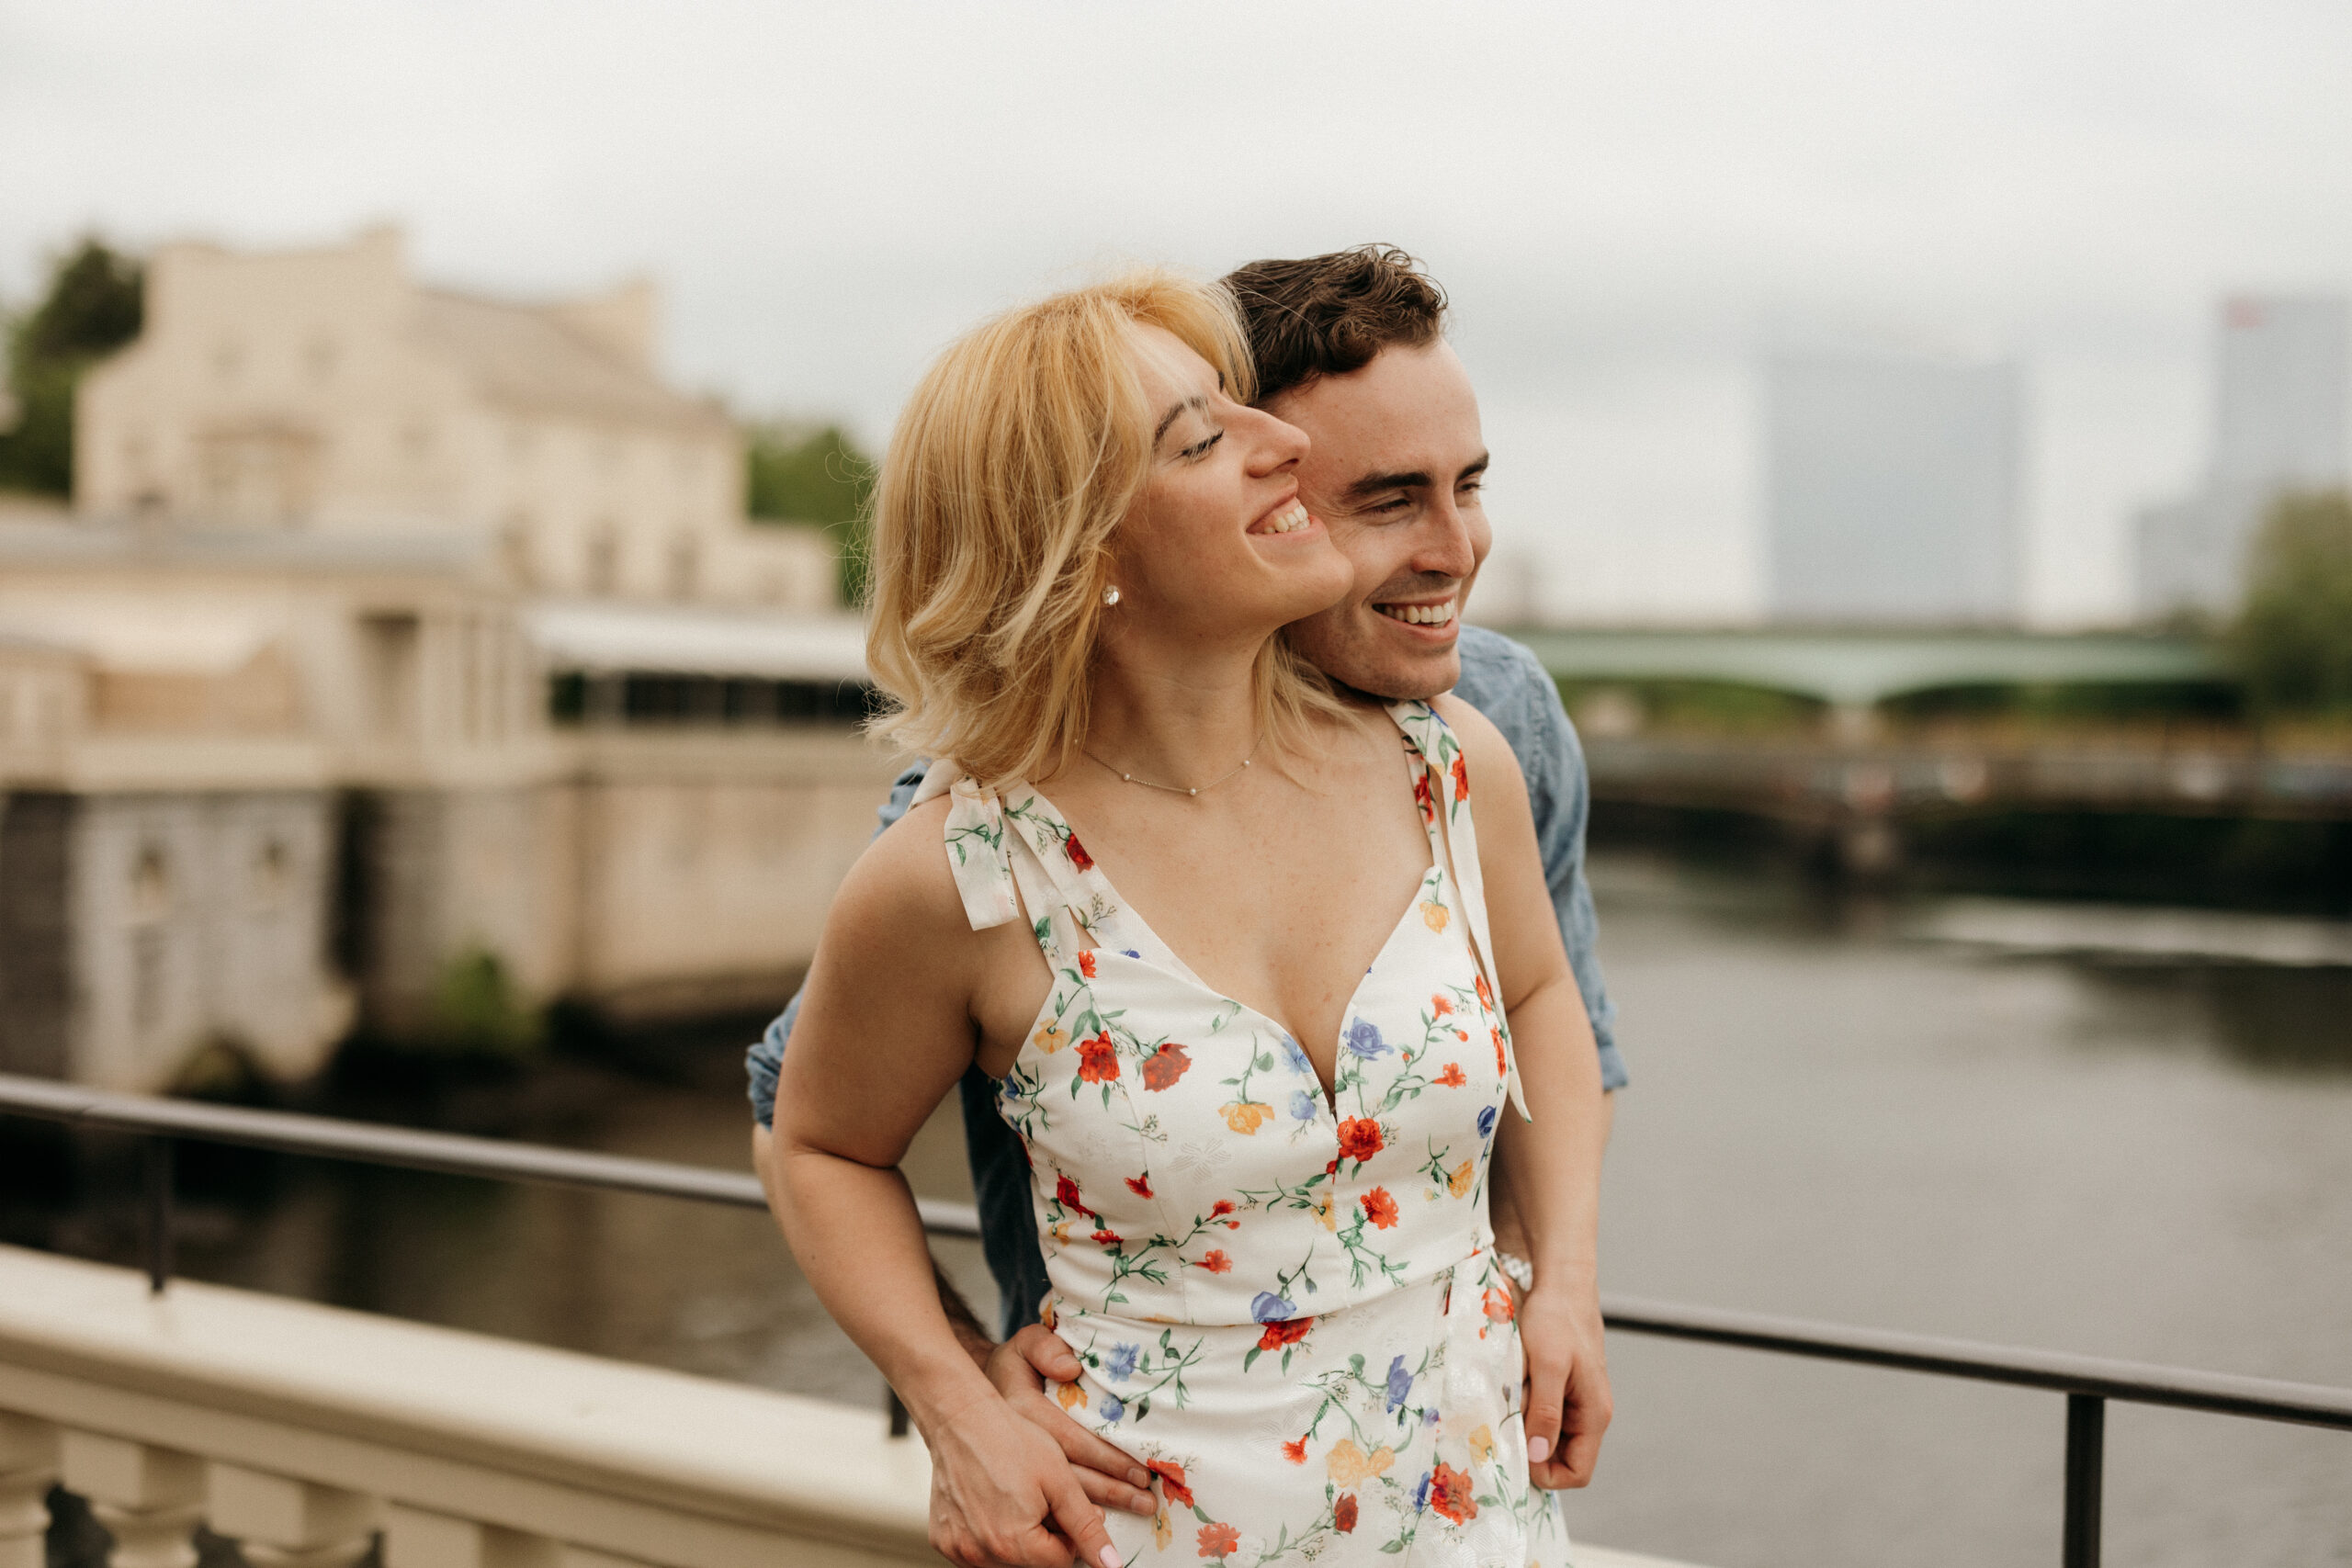 A couple standing on a bridge. The male figure behind the female, wrapping his hands around her as they look into the distance smiling. The unfocused water background keeps them focused in the center of the photo.